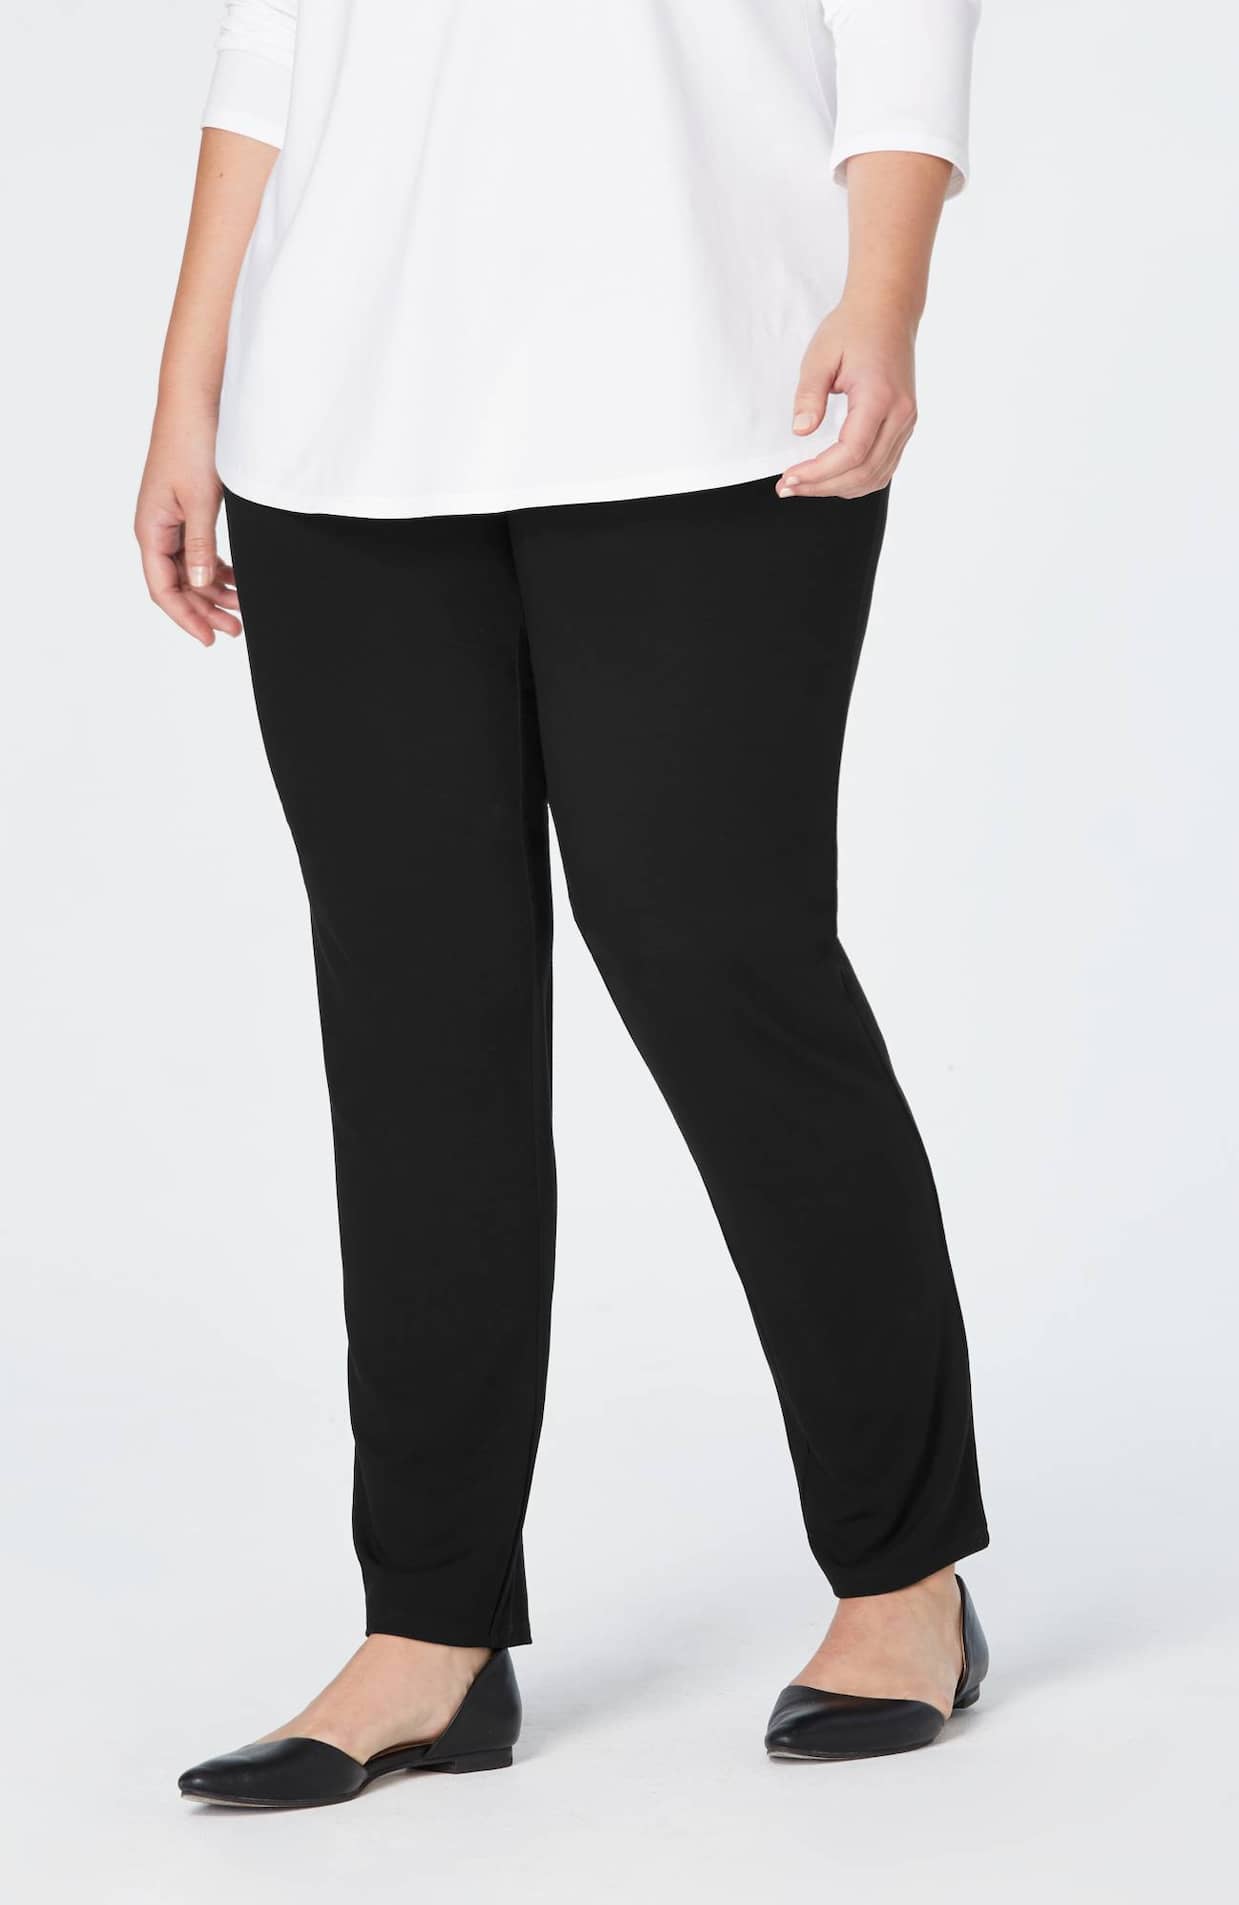 J. Jill Wearever Collection Smooth Fit Slim Leg